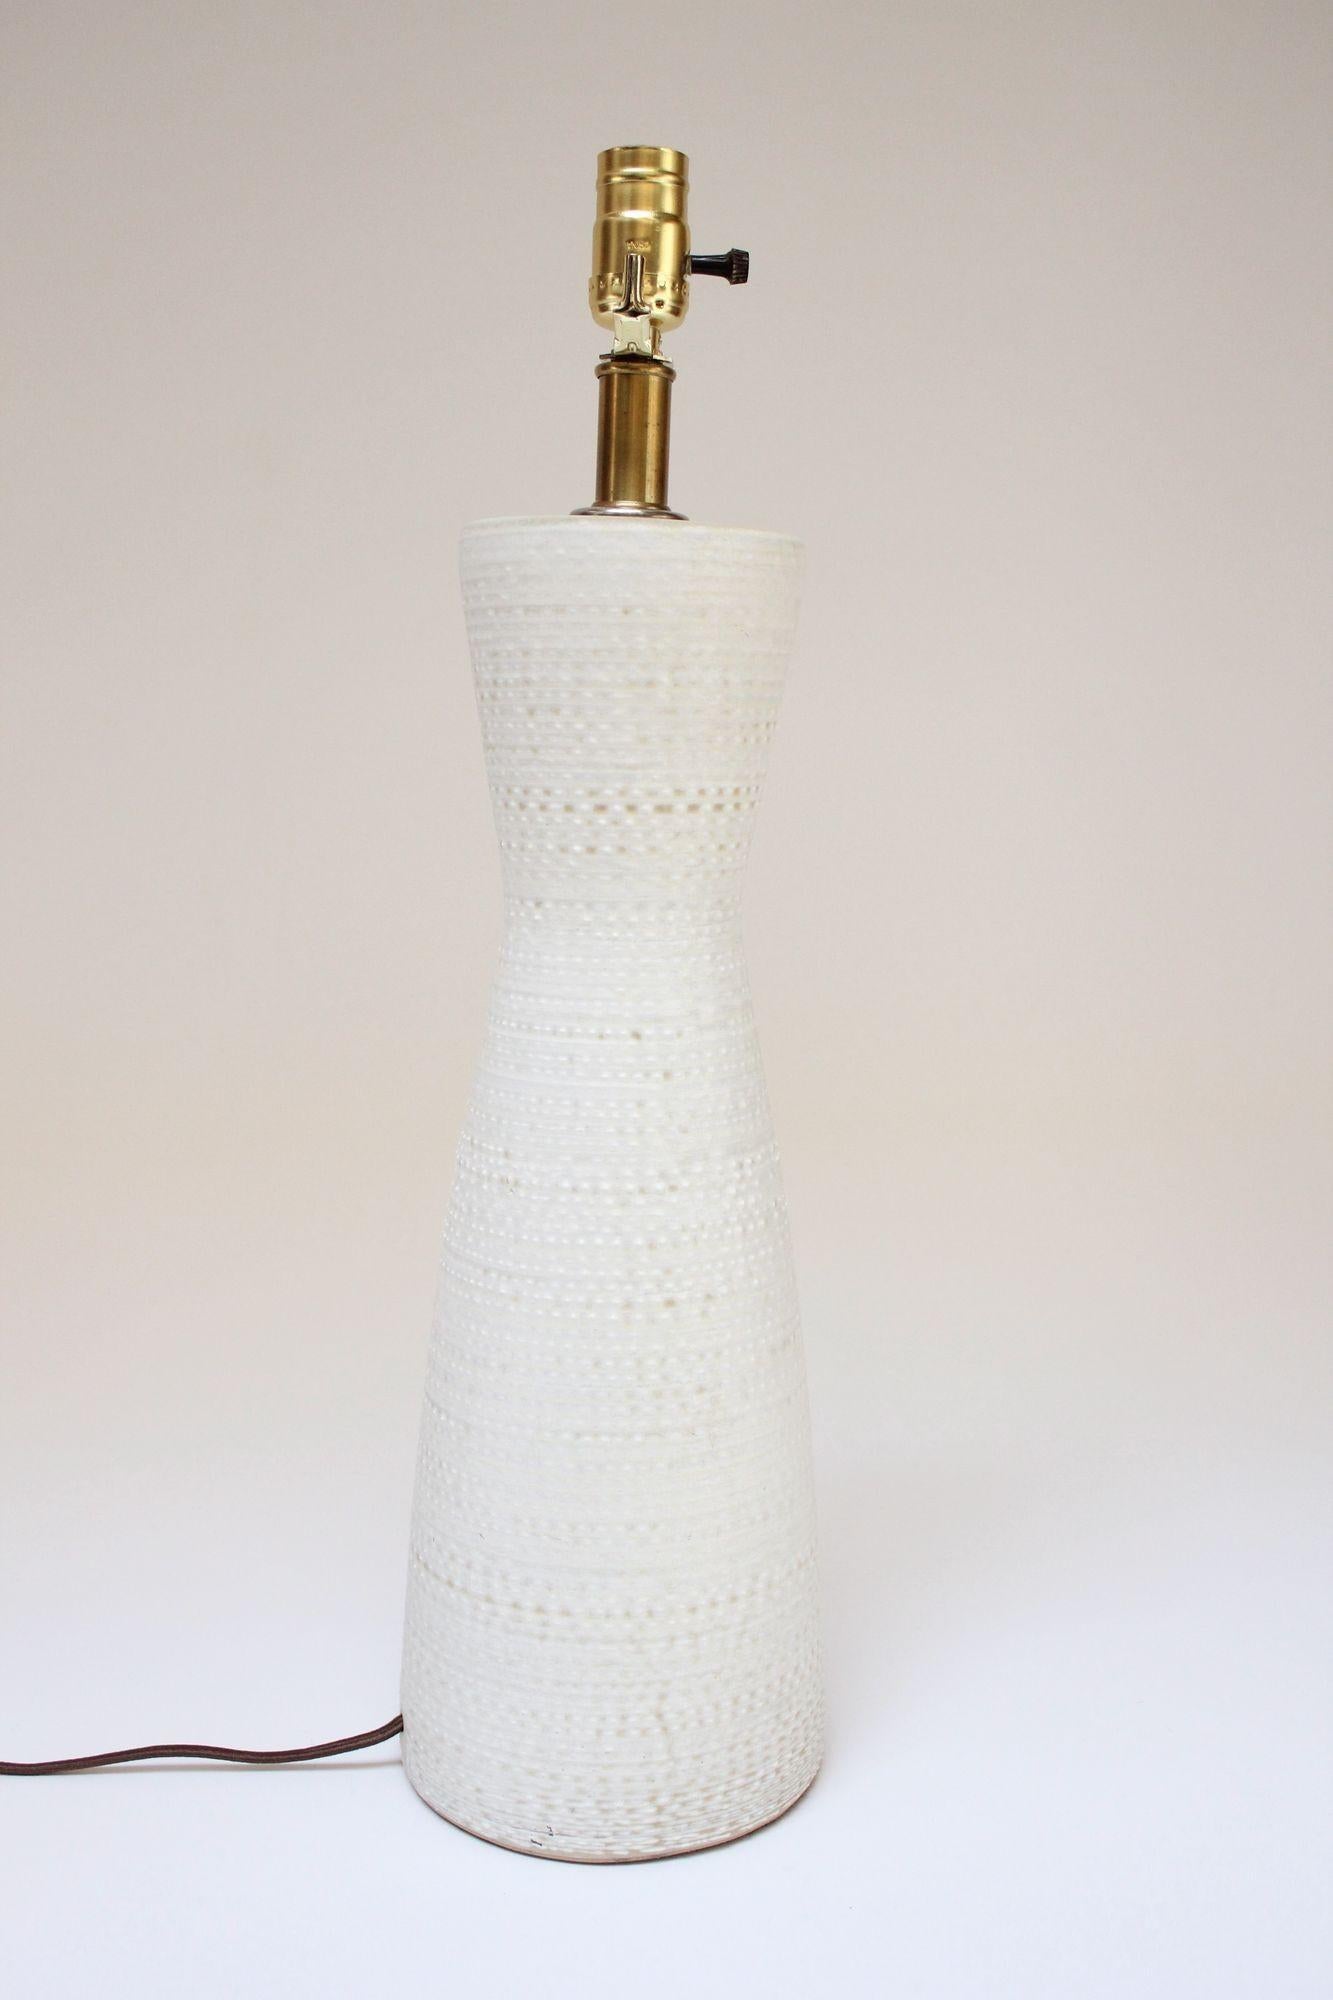 Hour-glass form ceramic table lamp in textured/nubby white over beige glaze designed in the 1960s by Lee Rosen for Design Technics. Sculptural, modernist form with elegant brass stem and accents.
Only light wear/crazing present to glaze, as shown.